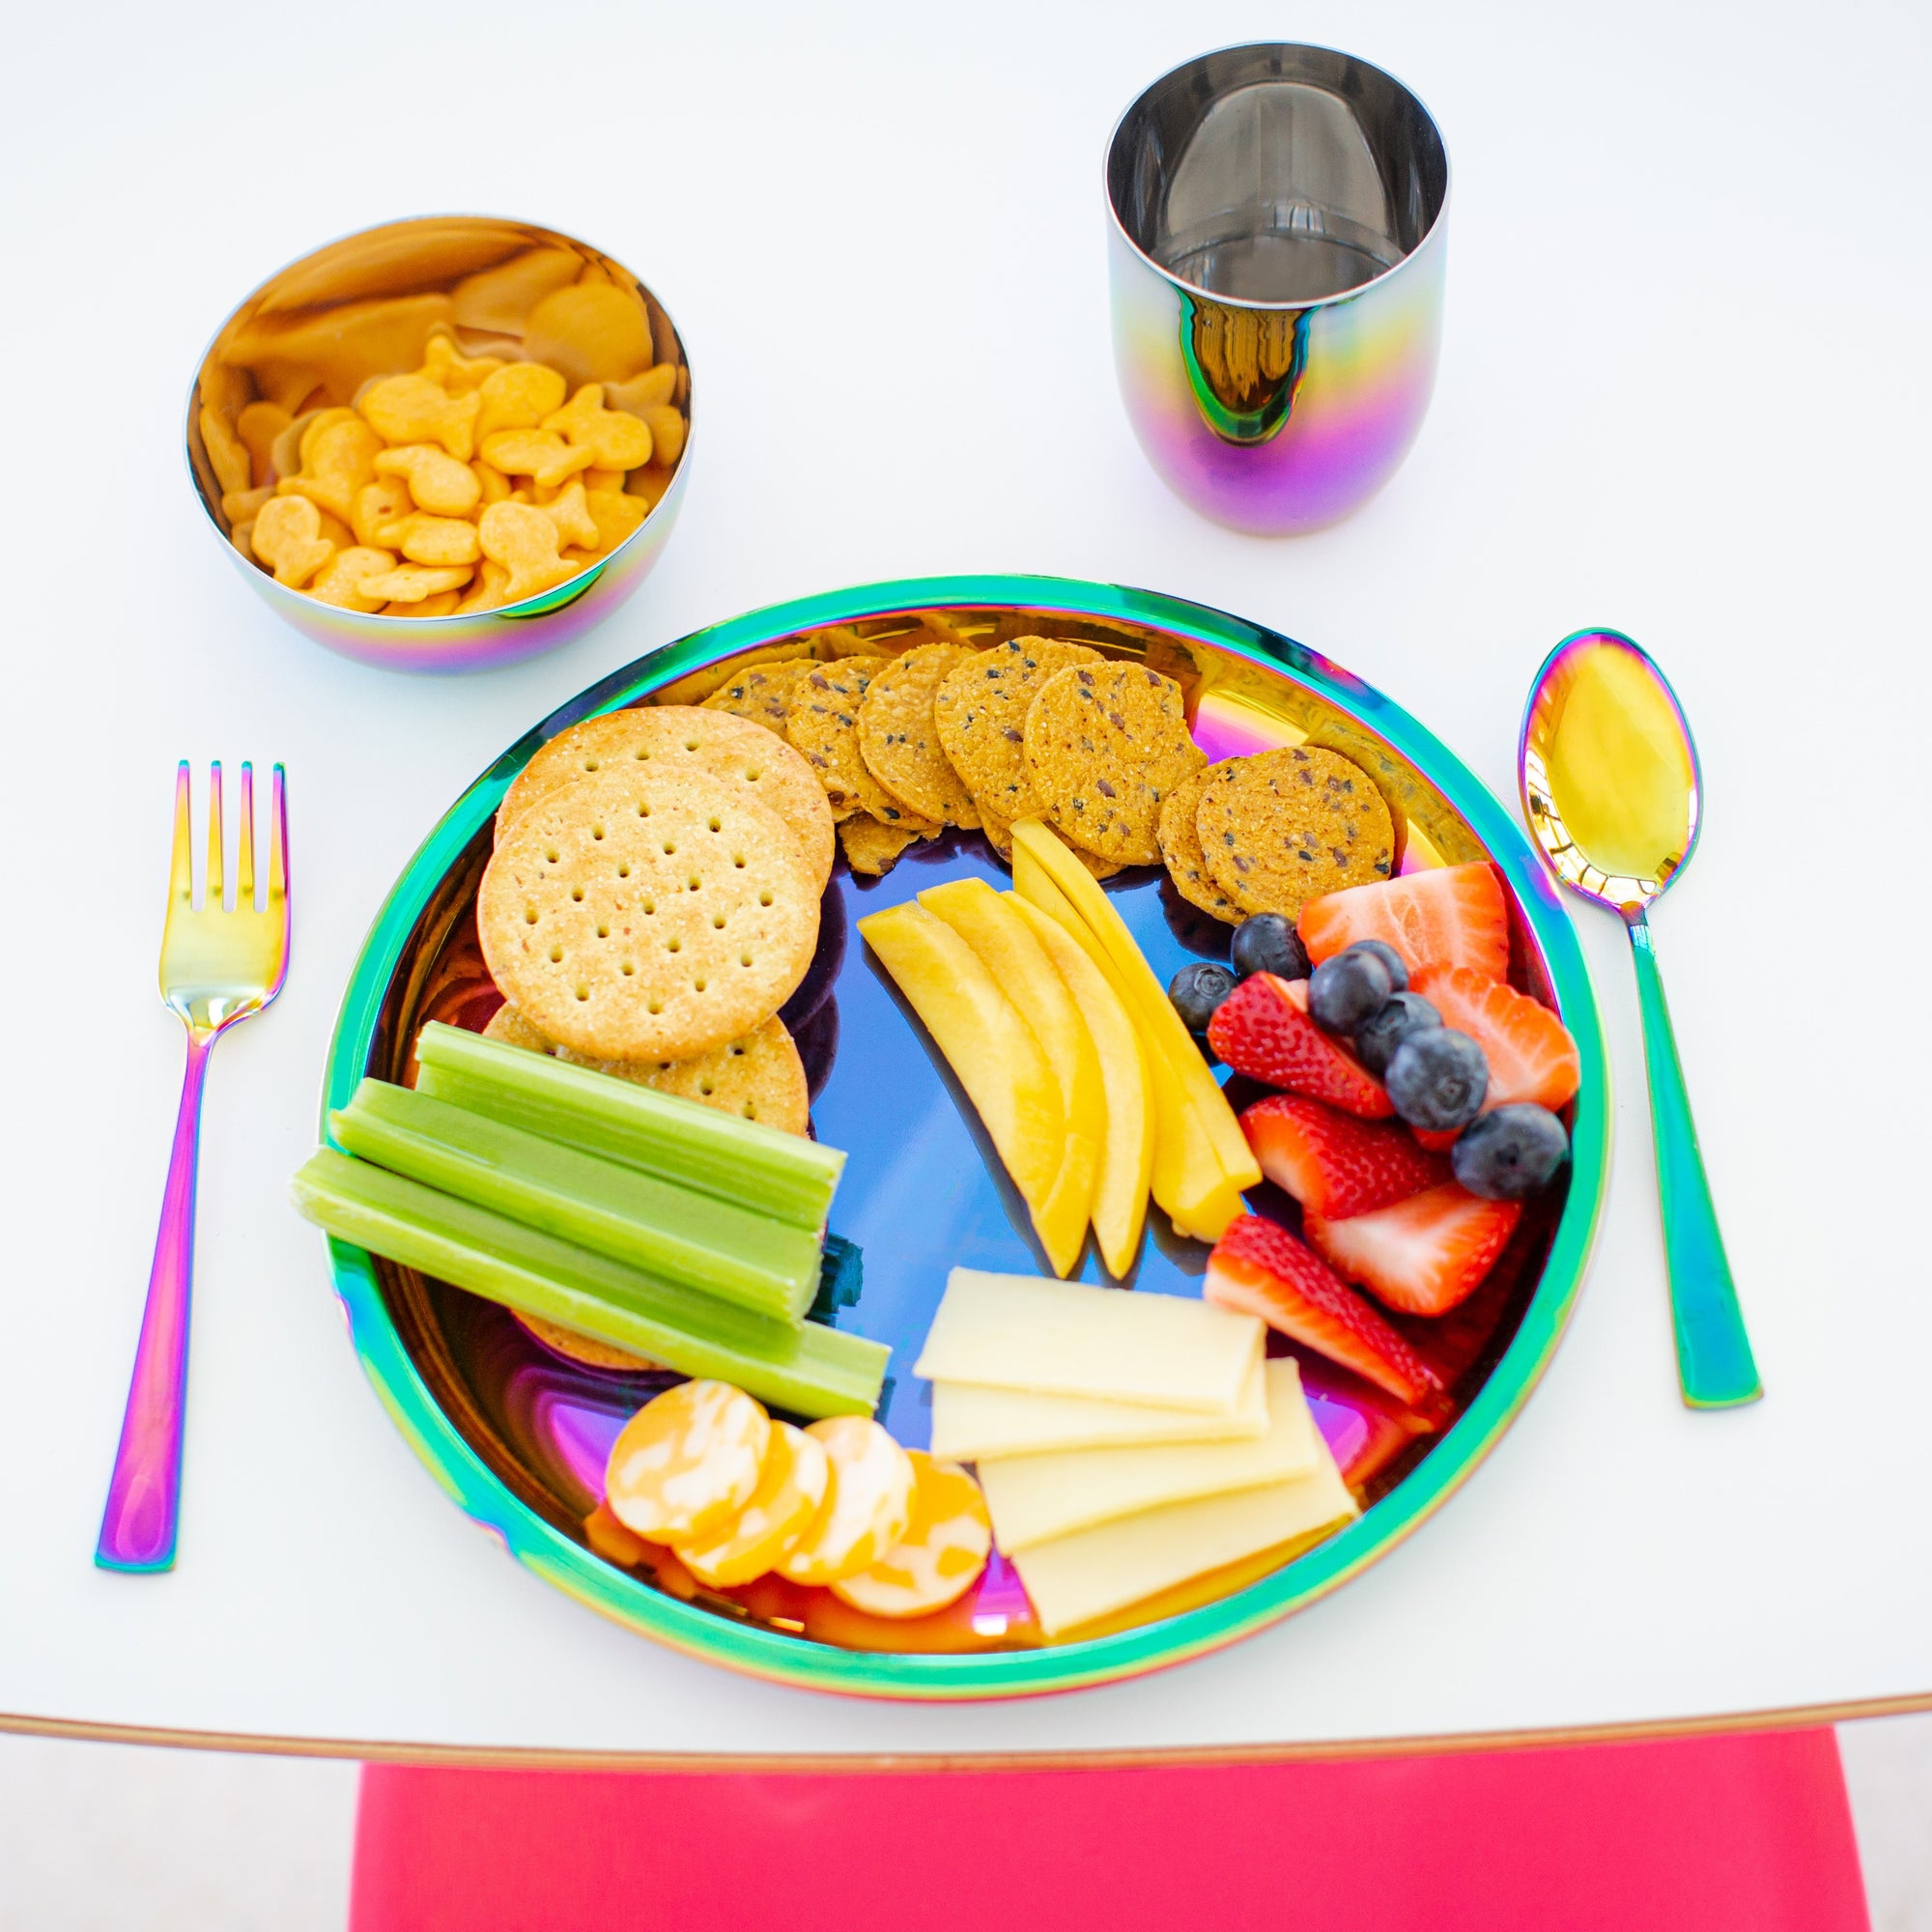 Rainbow purposeful 9 inch round plate, cutlery and conscious 8 oz cup for the family. Stainless steel and titanium - eco-friendly. Our dishes keep kids' healthy food healthy.